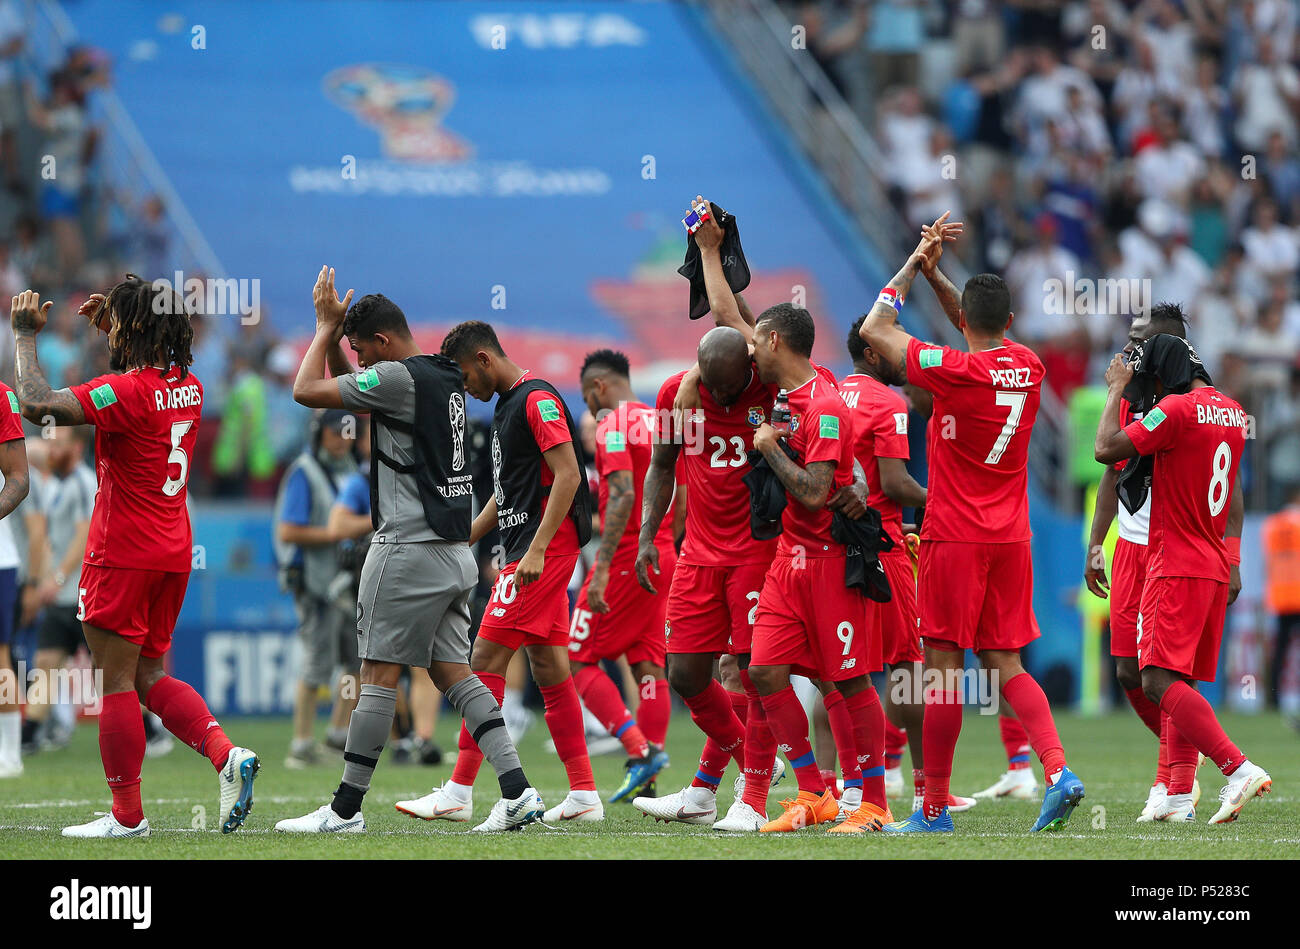 Nijni Novgorod, Russia. 24th June, 2018:ENGLAND VS. PANAMA - Panama&#39;s Felipe Baloy (23) celebrates after scoring the first goal of Panama in the history of the Cups during a match between England and Panama valid for the second round of group G of the 2018 World Cup, held at the Nizhny Novgorod stadium in the city of Nihzny Novgorod, Russia. (Photo: Rodolfo Buhrer/La Imagem/Fotoarena) Credit: Foto Arena LTDA/Alamy Live News Stock Photo